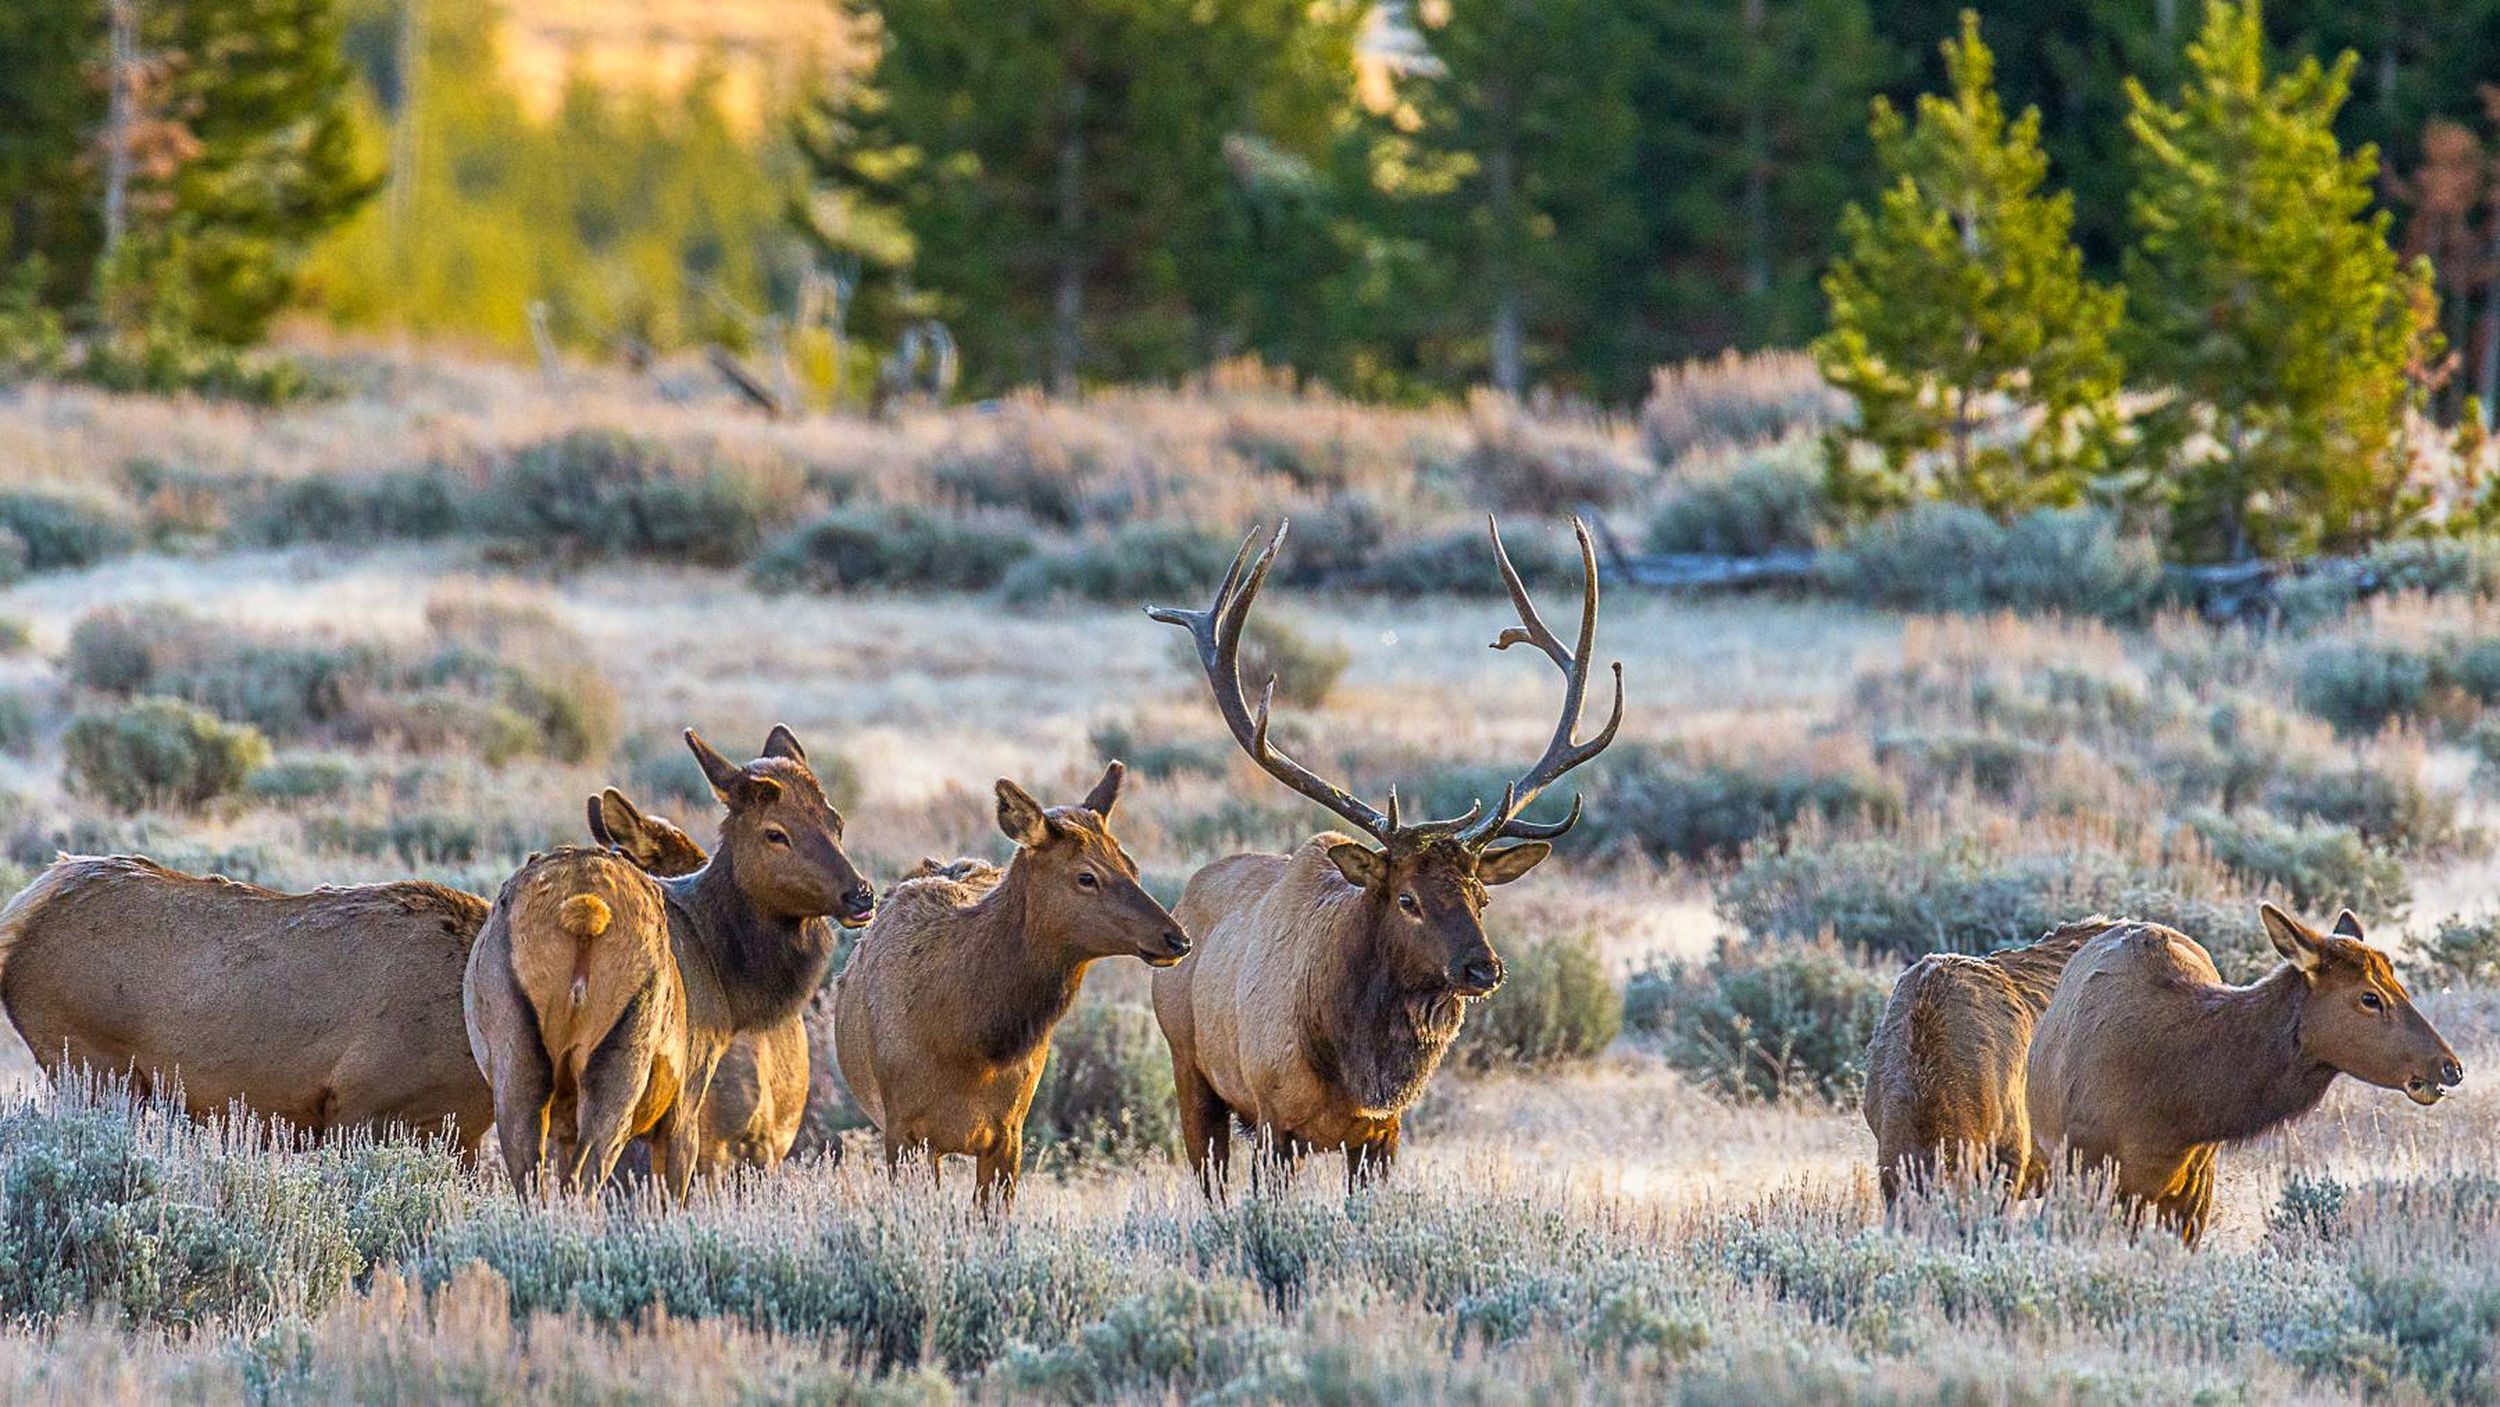 Survey shows Yellowstone elk herd at highest level since ‘05 The